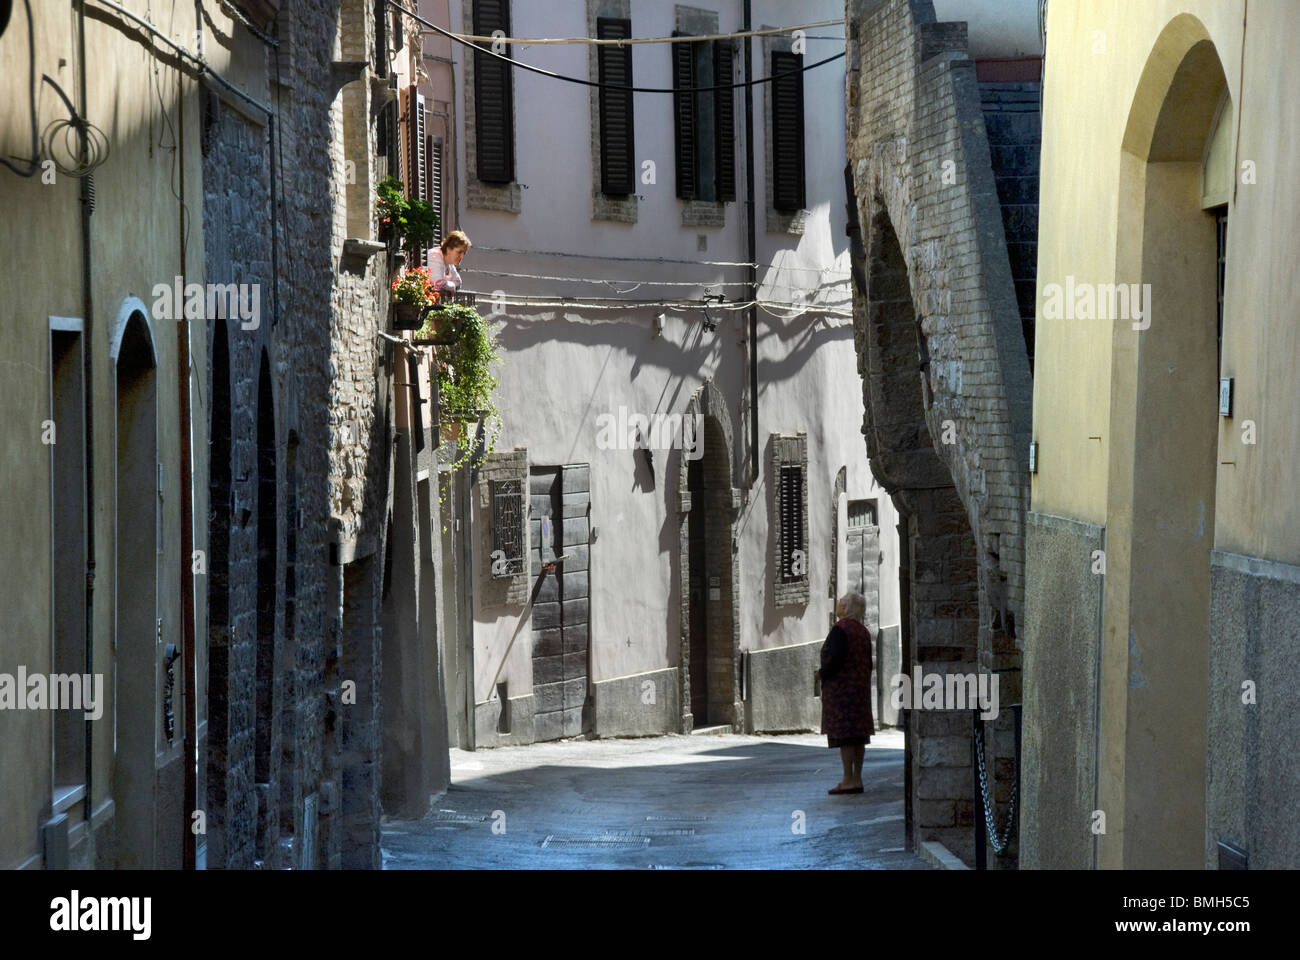 Two women in conversation from the window to the street in the town of Spello, Umbria, Italy Stock Photo